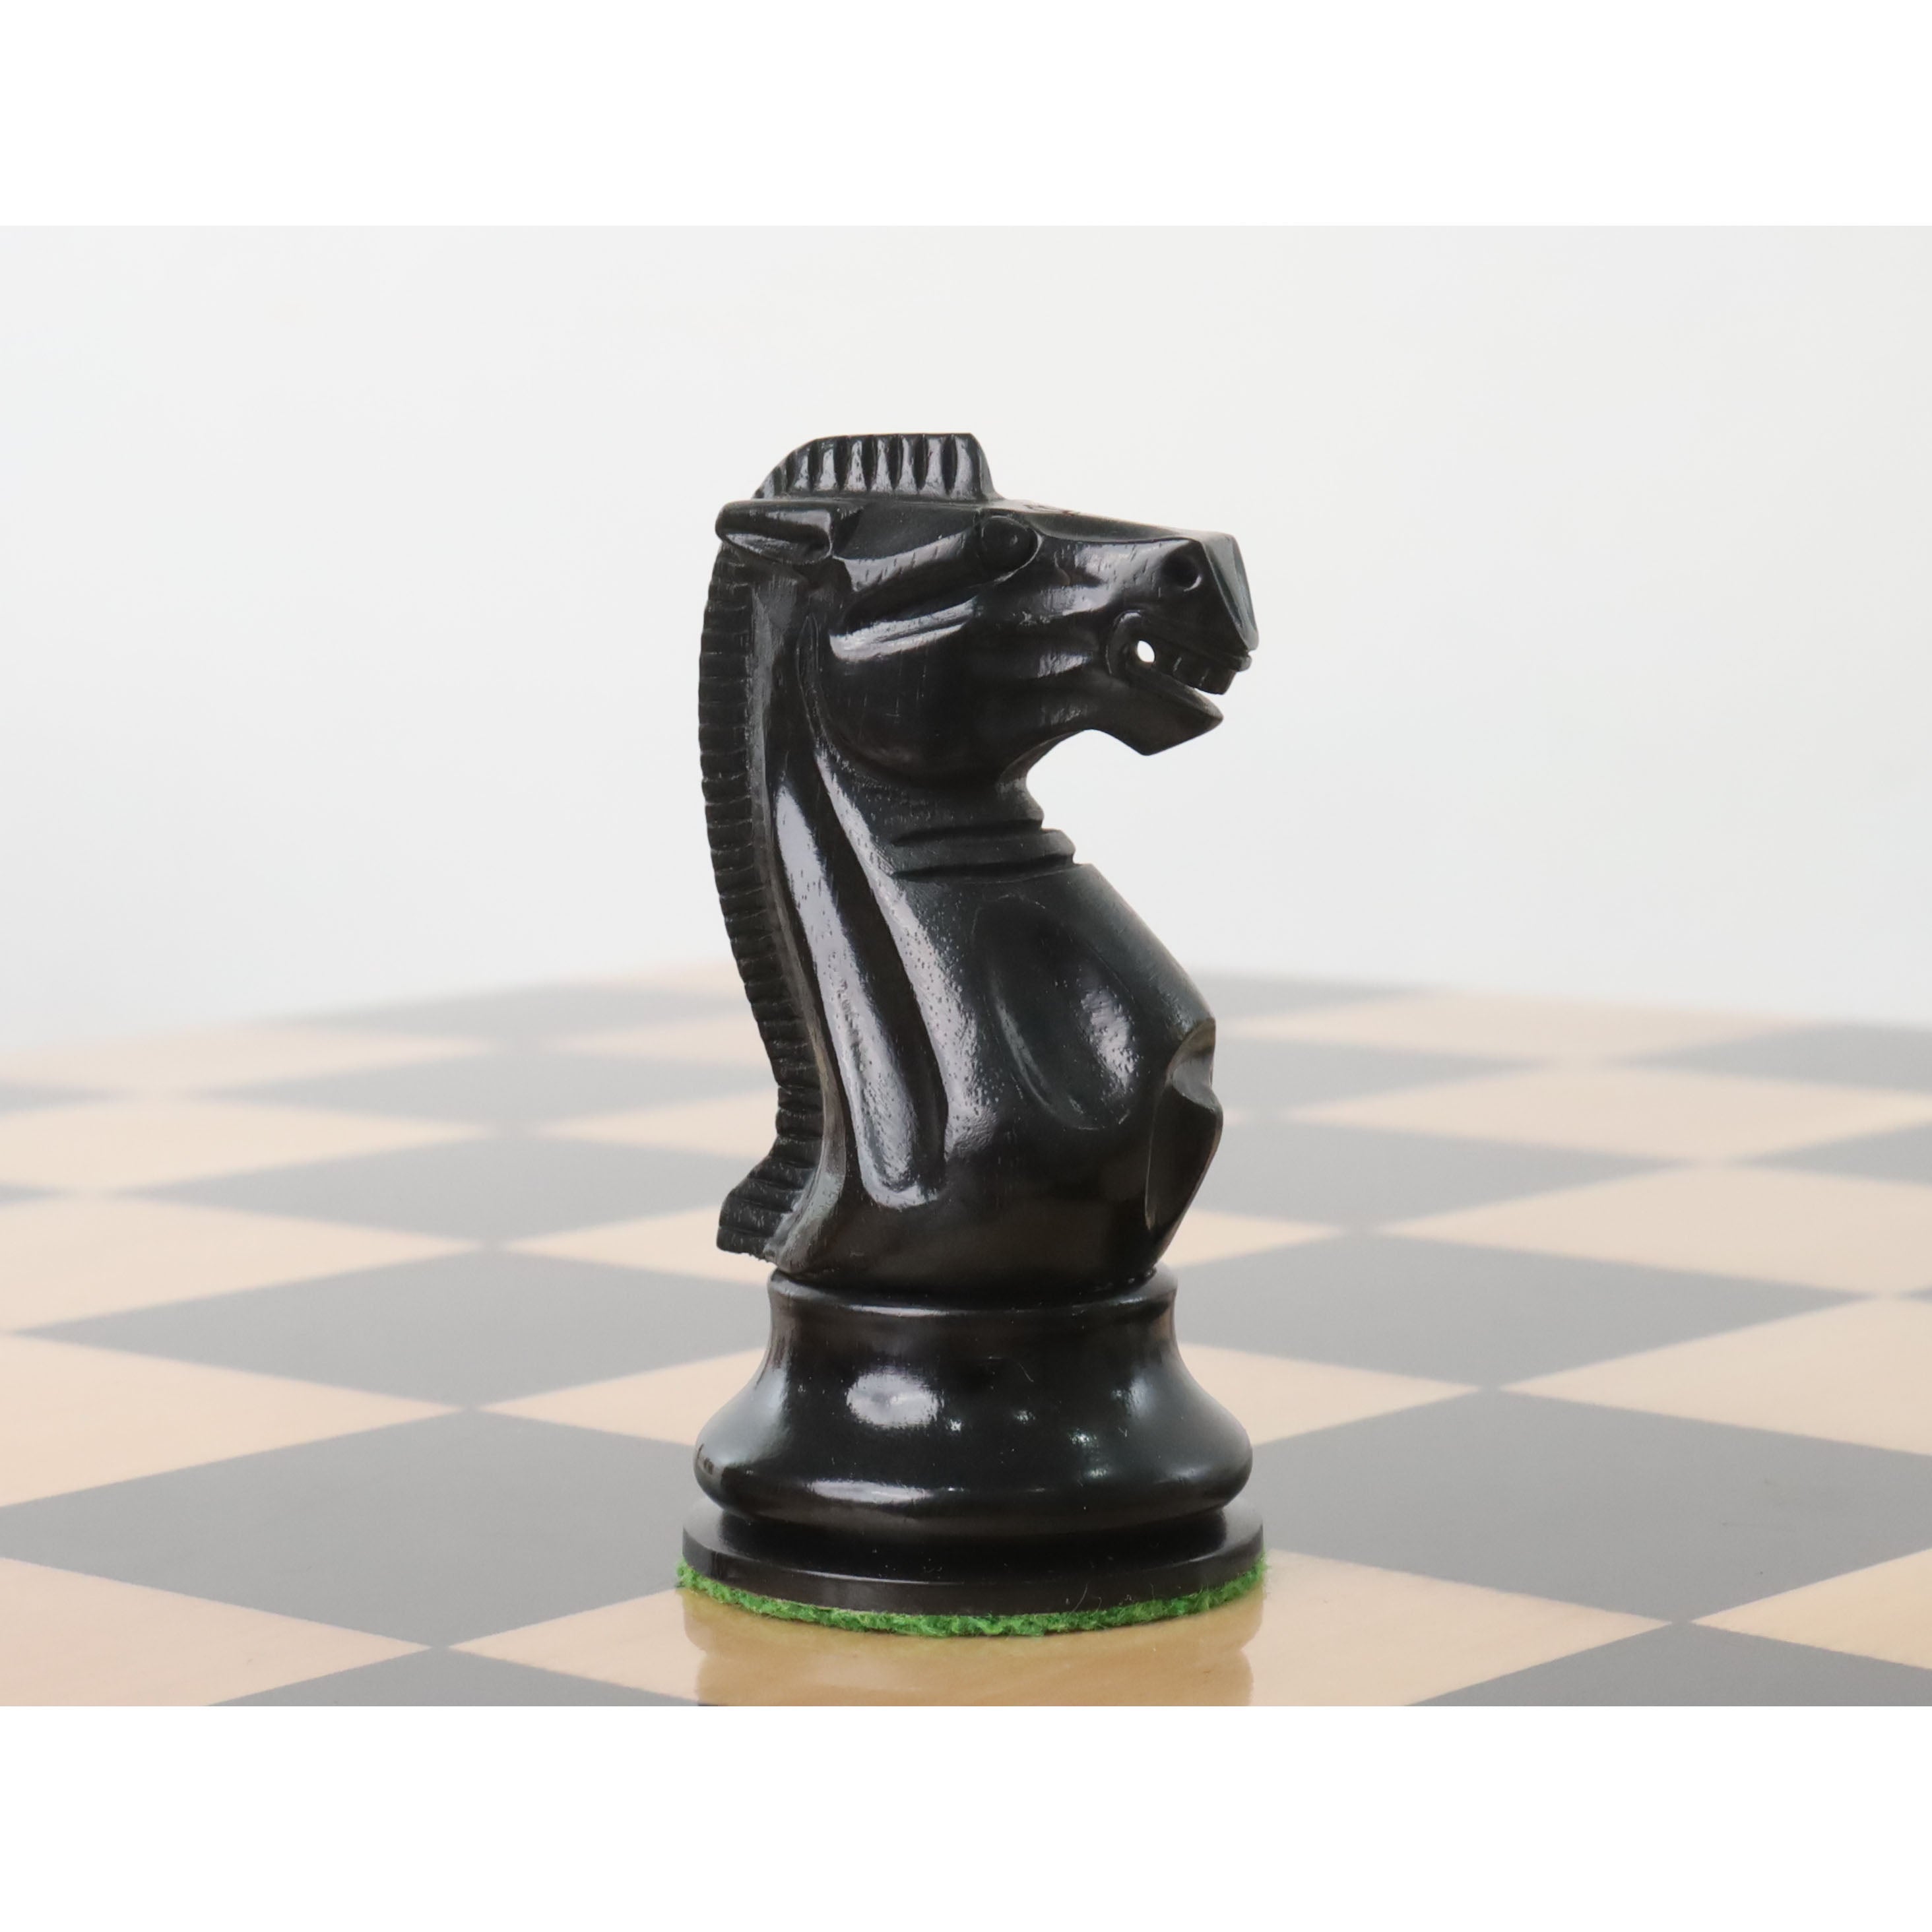 19th century B & Co reproduced Chess Set- Chess Pieces Only- Genuine Ebony Wood – 4.3″